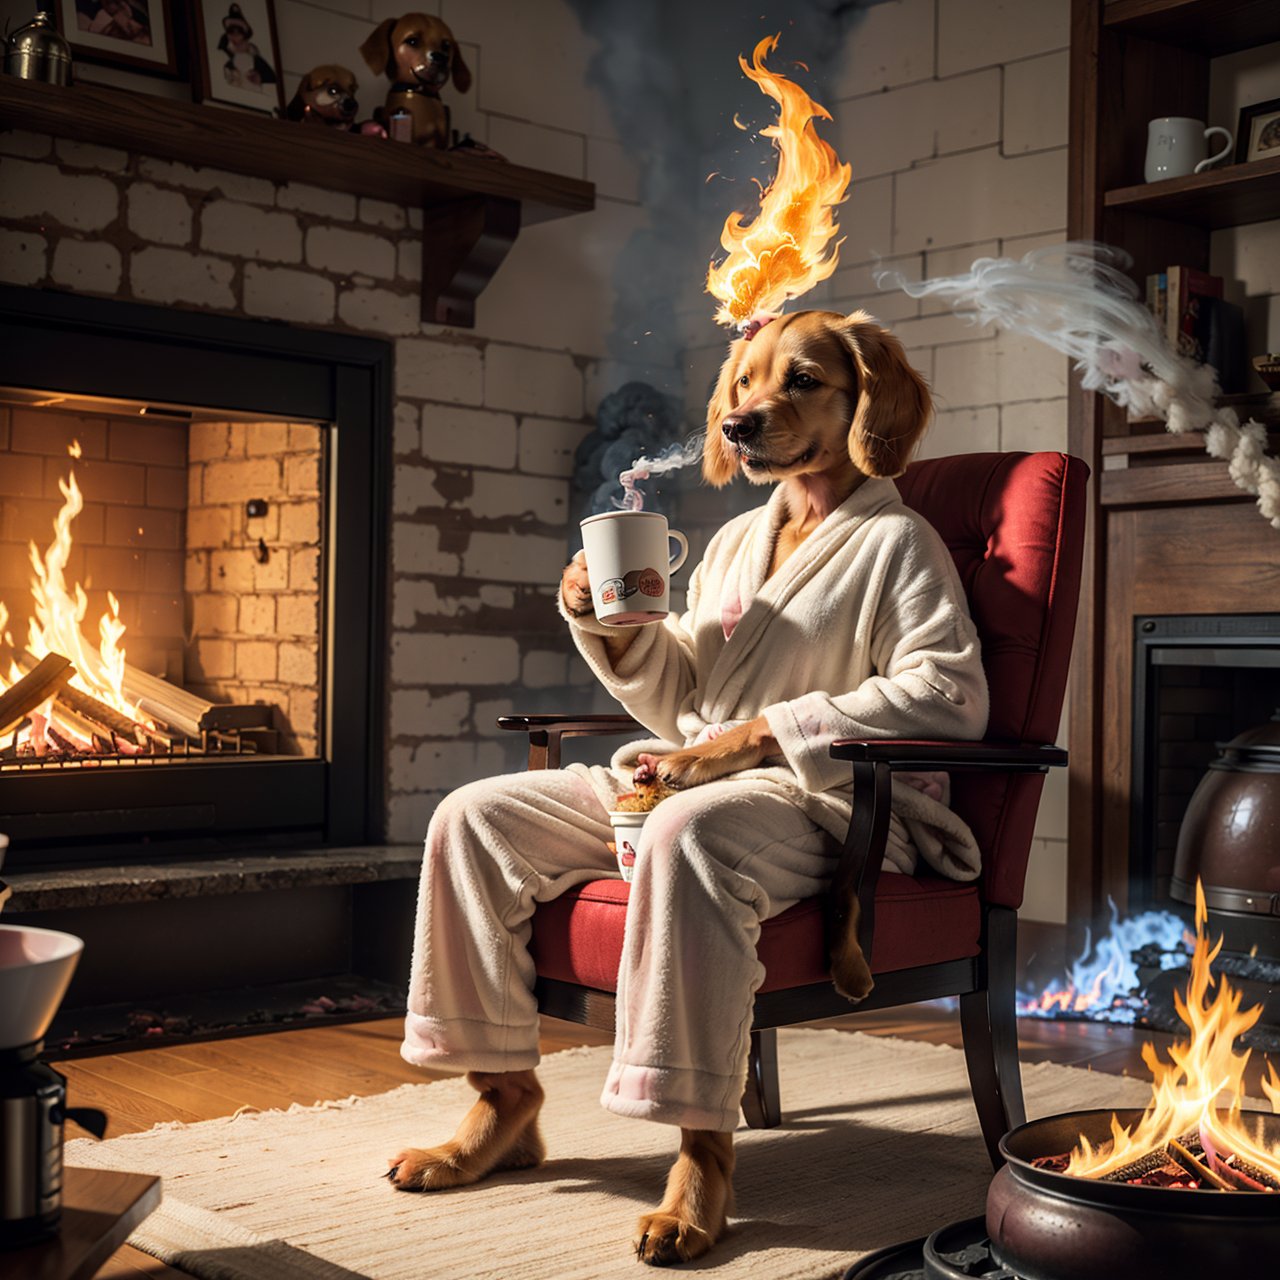 (best quality:1.23), (masterpiece:1.12), (realistic:1.24), (anthropomorphic dog:1.5) holding a coffee cup, sitting, in a robe, eating breakfast and holding a coffee cup, hat, particles, volumetric lighting, room burn down, ground and chair on fire, lots of gadgets and equipment on fire, smoke, (flames all around:1.2),
